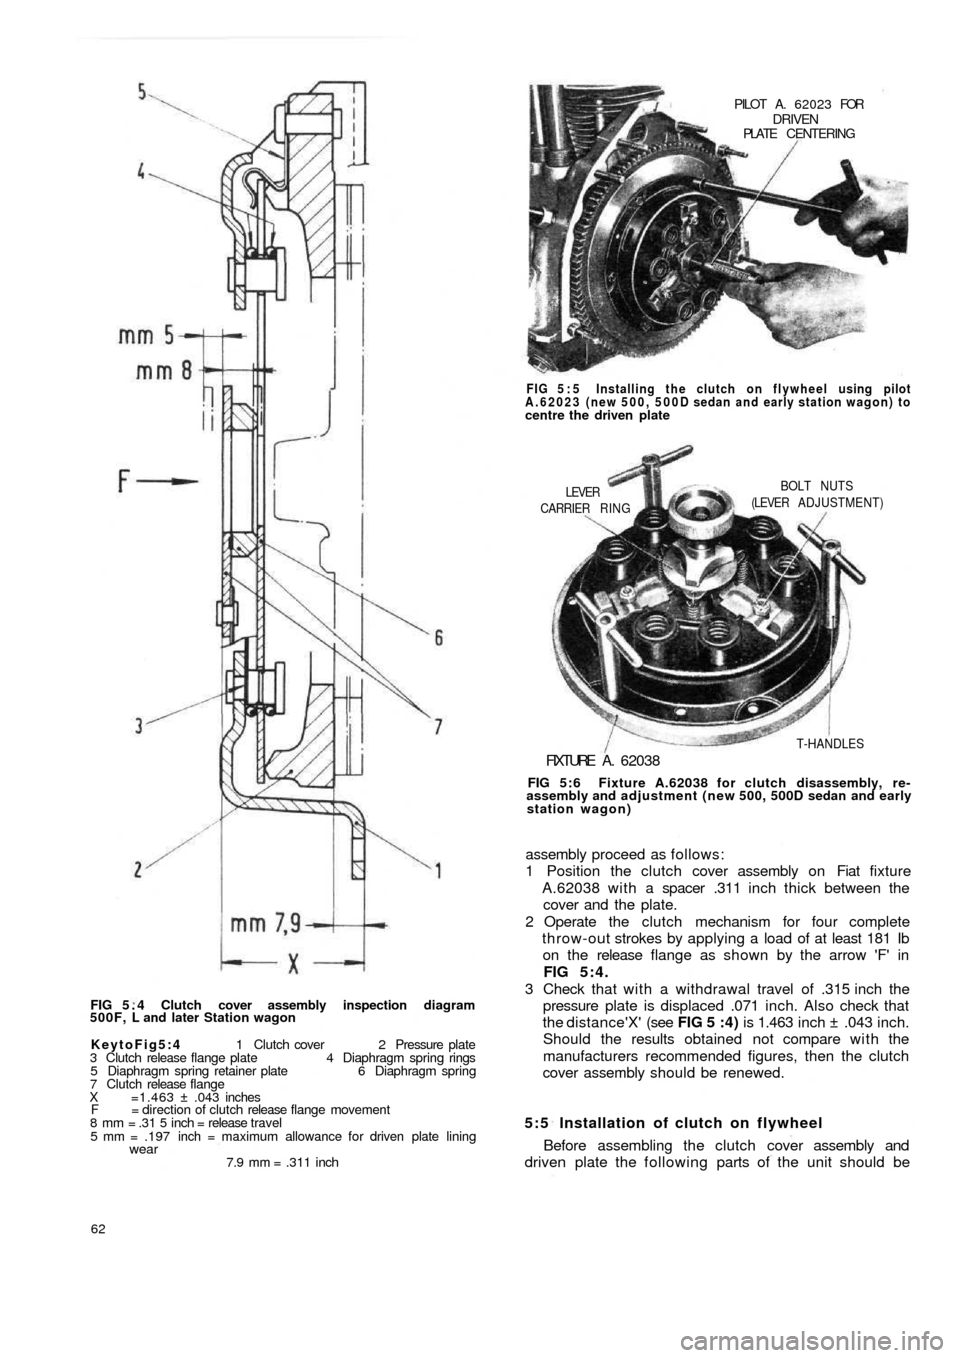 FIAT 500 1957 1.G Repair Manual FIG 5 . 4  Clutch cover assembly inspection diagram
500F, L and later Station wagon
KeytoFig5:4 1 Clutch cover 2 Pressure plate
3 Clutch release flange plate 4 Diaphragm spring rings
5 Diaphragm sprin